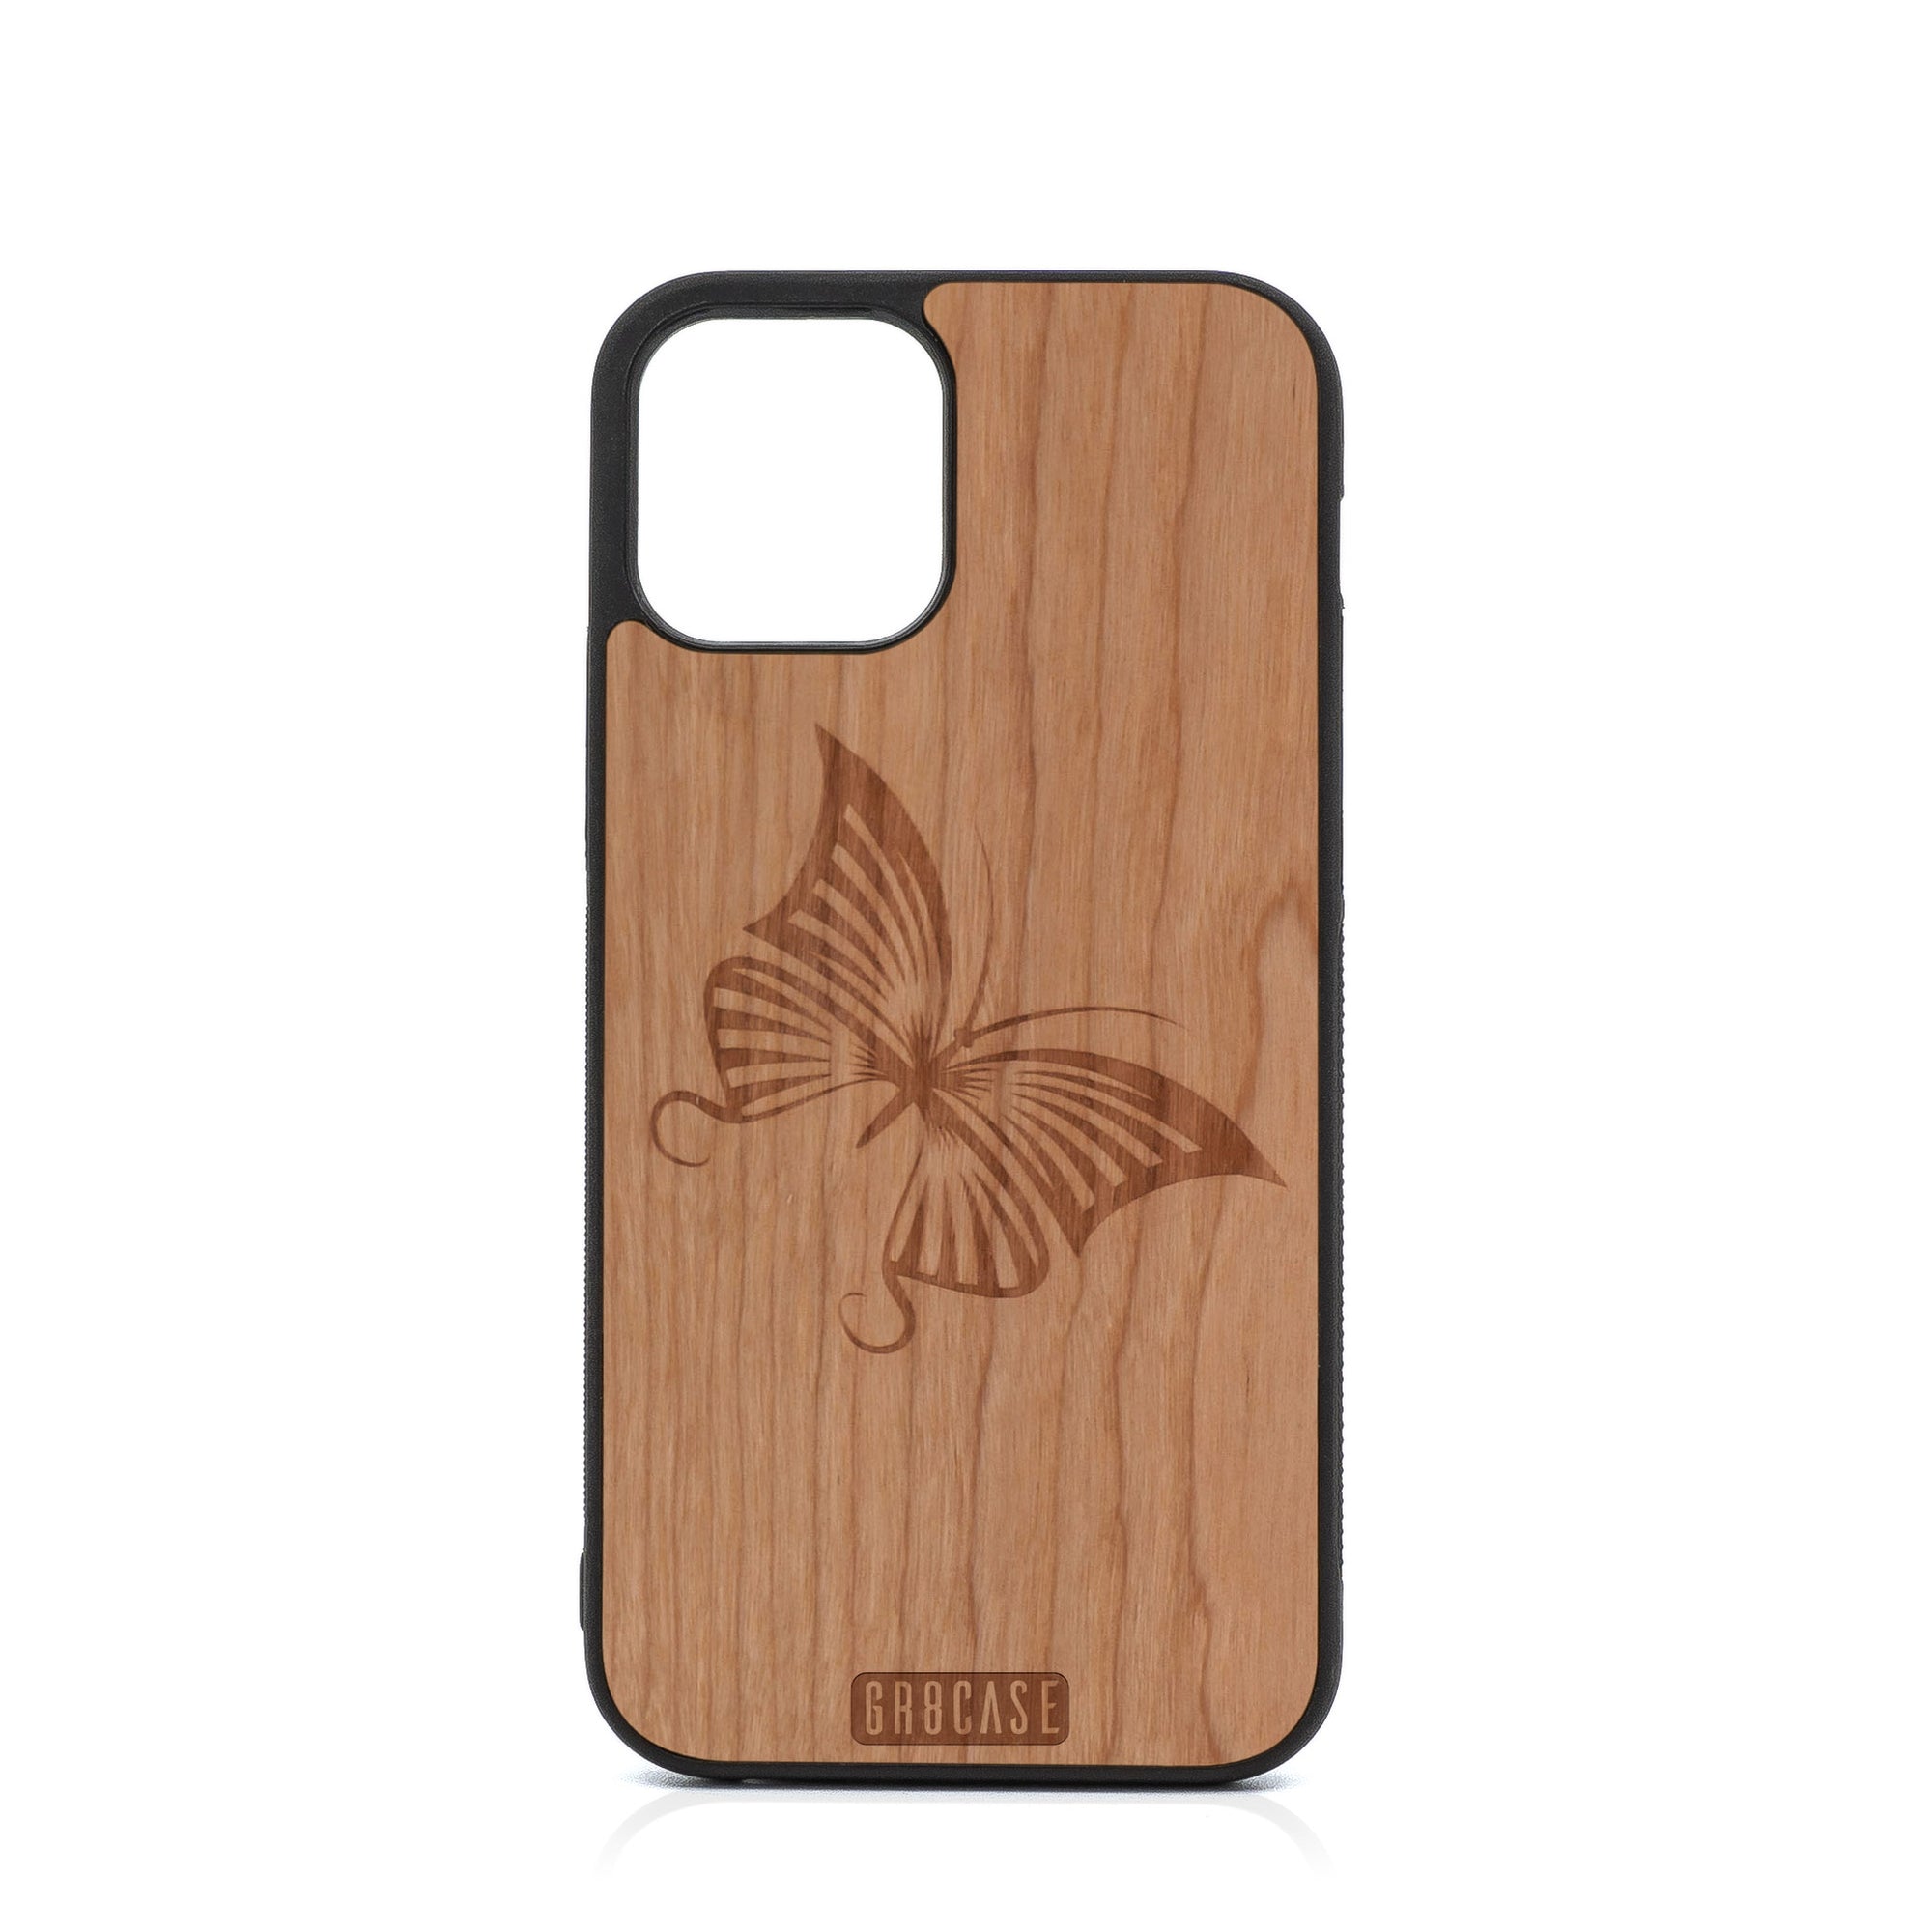 Butterfly Design Wood Case For iPhone 12